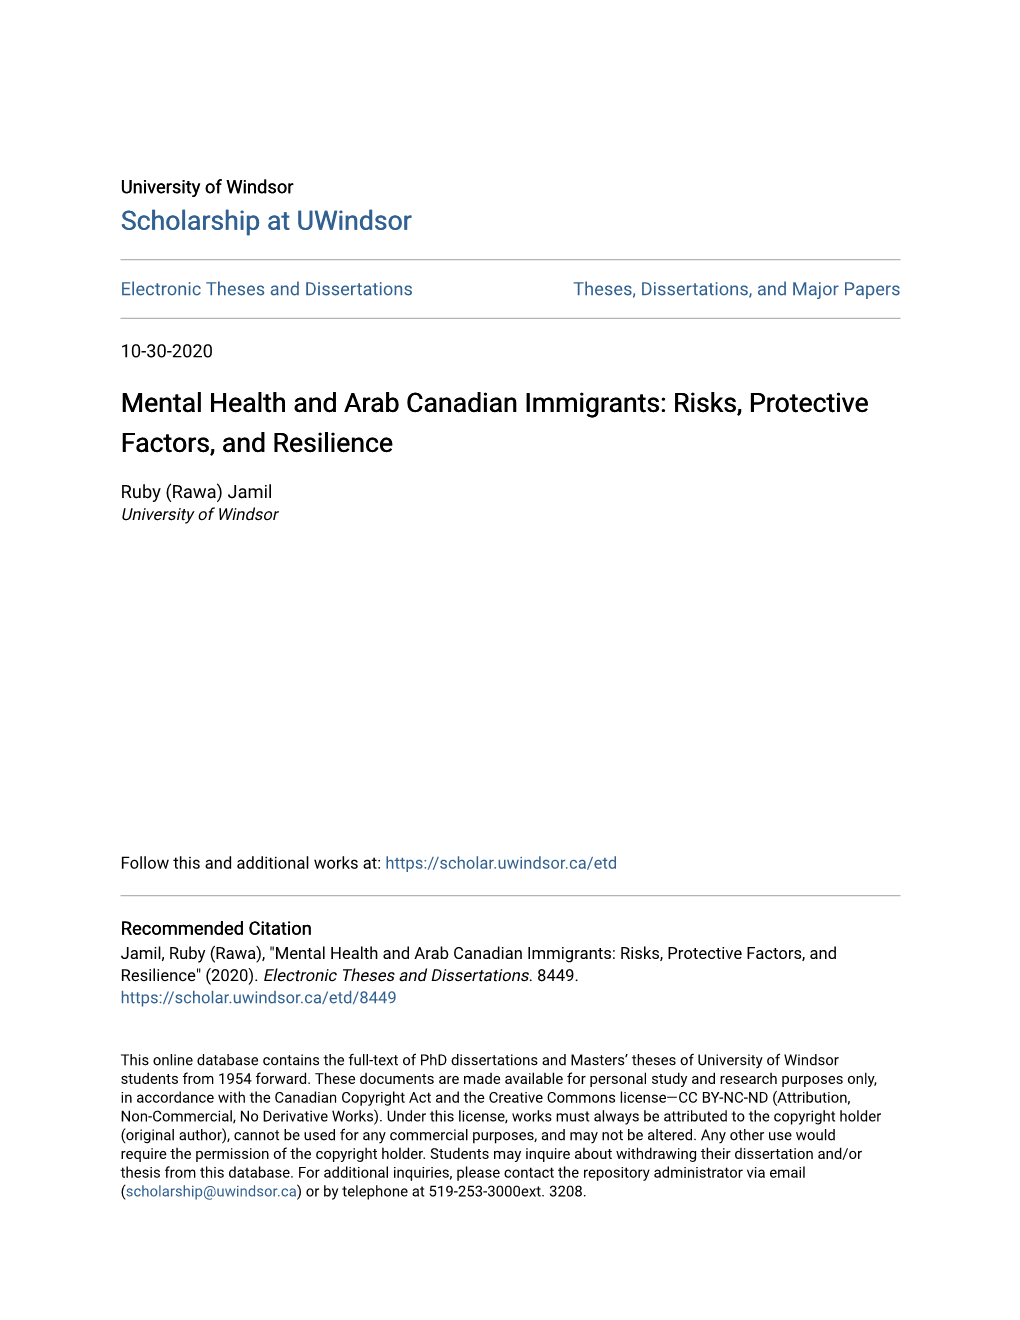 Mental Health and Arab Canadian Immigrants: Risks, Protective Factors, and Resilience